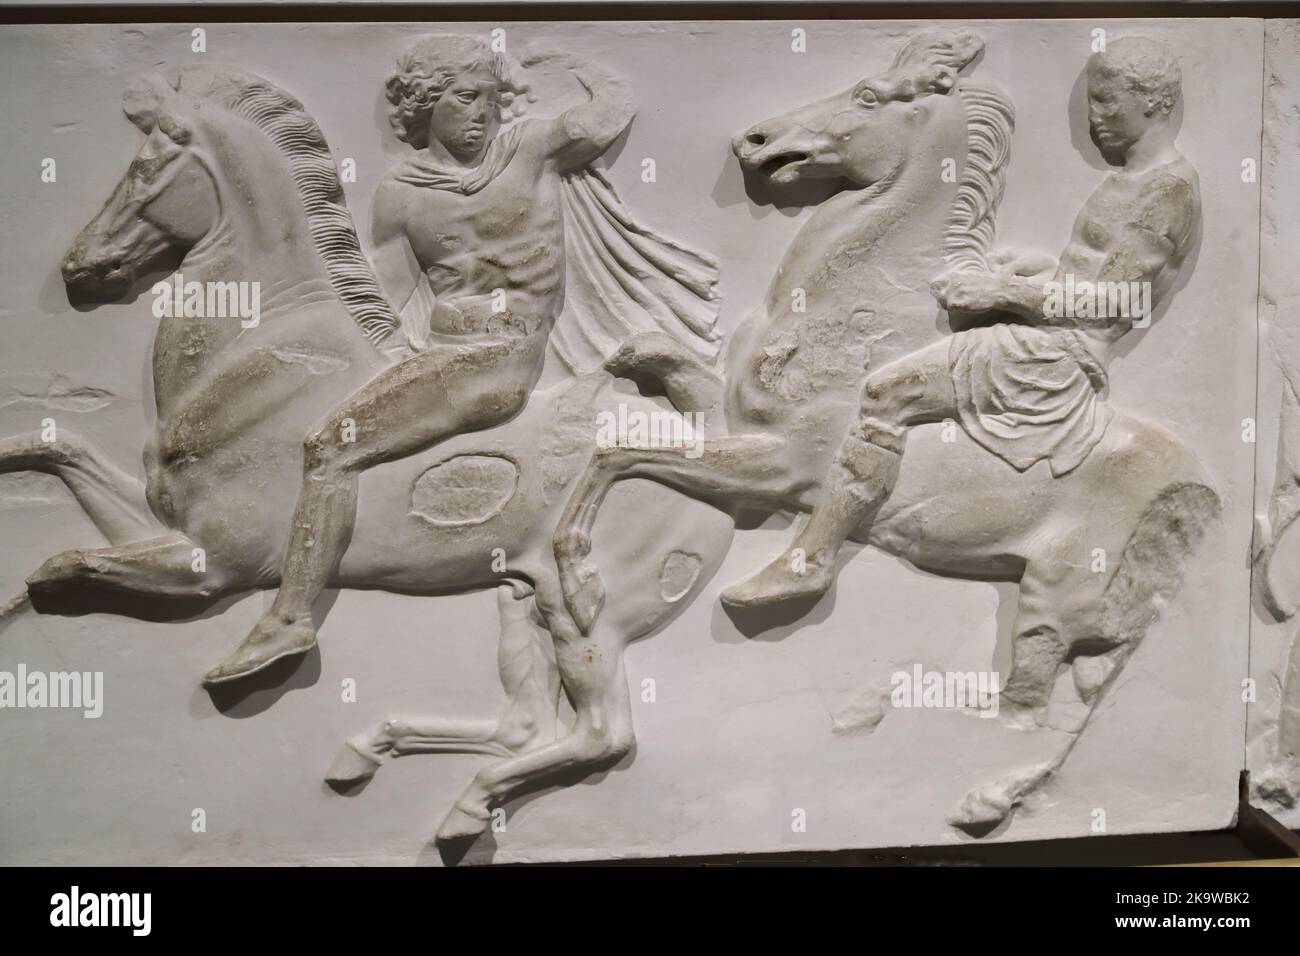 Parthenon Frieze (Elgin Marbles), two horsemen from the West Frieze of the Parthenon on the Acropolis at the British Museum, London, UKon the Acropolis in Athens Stock Photo